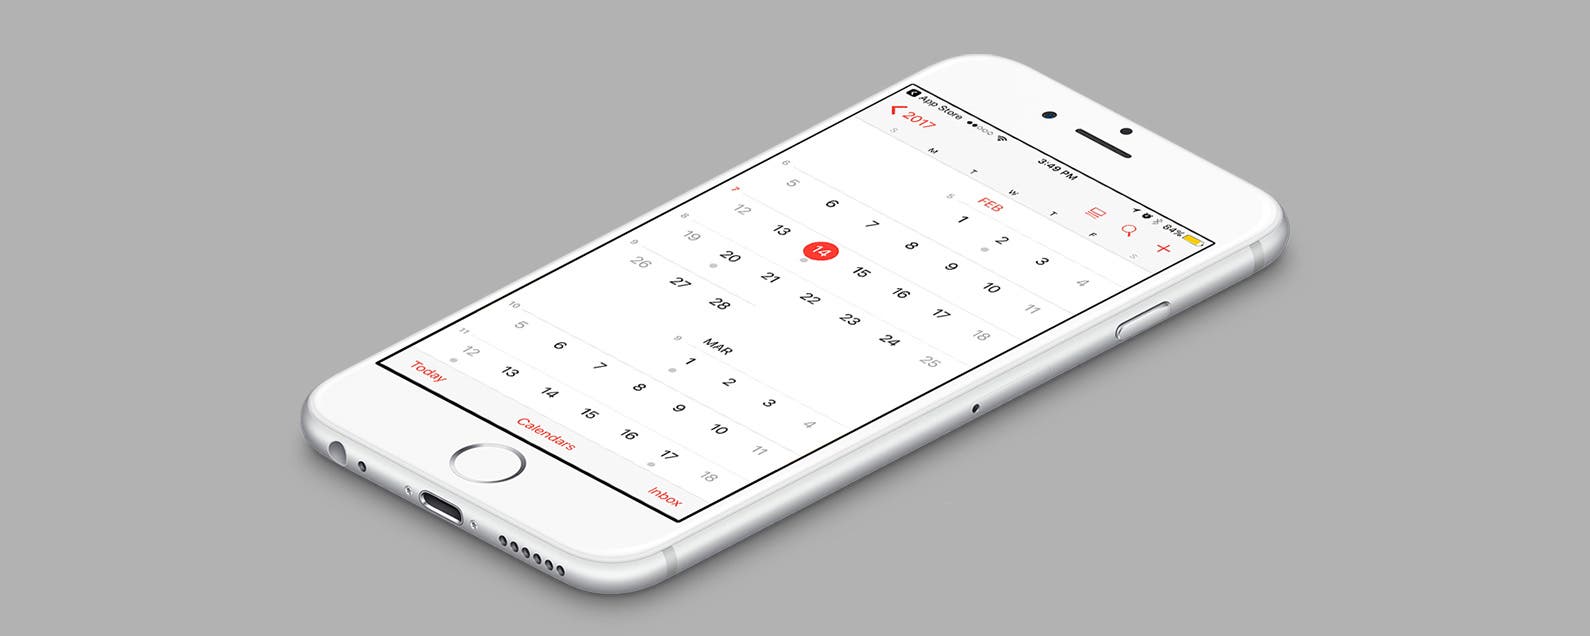 How to Show Week Numbers in Calendar App on iPhone